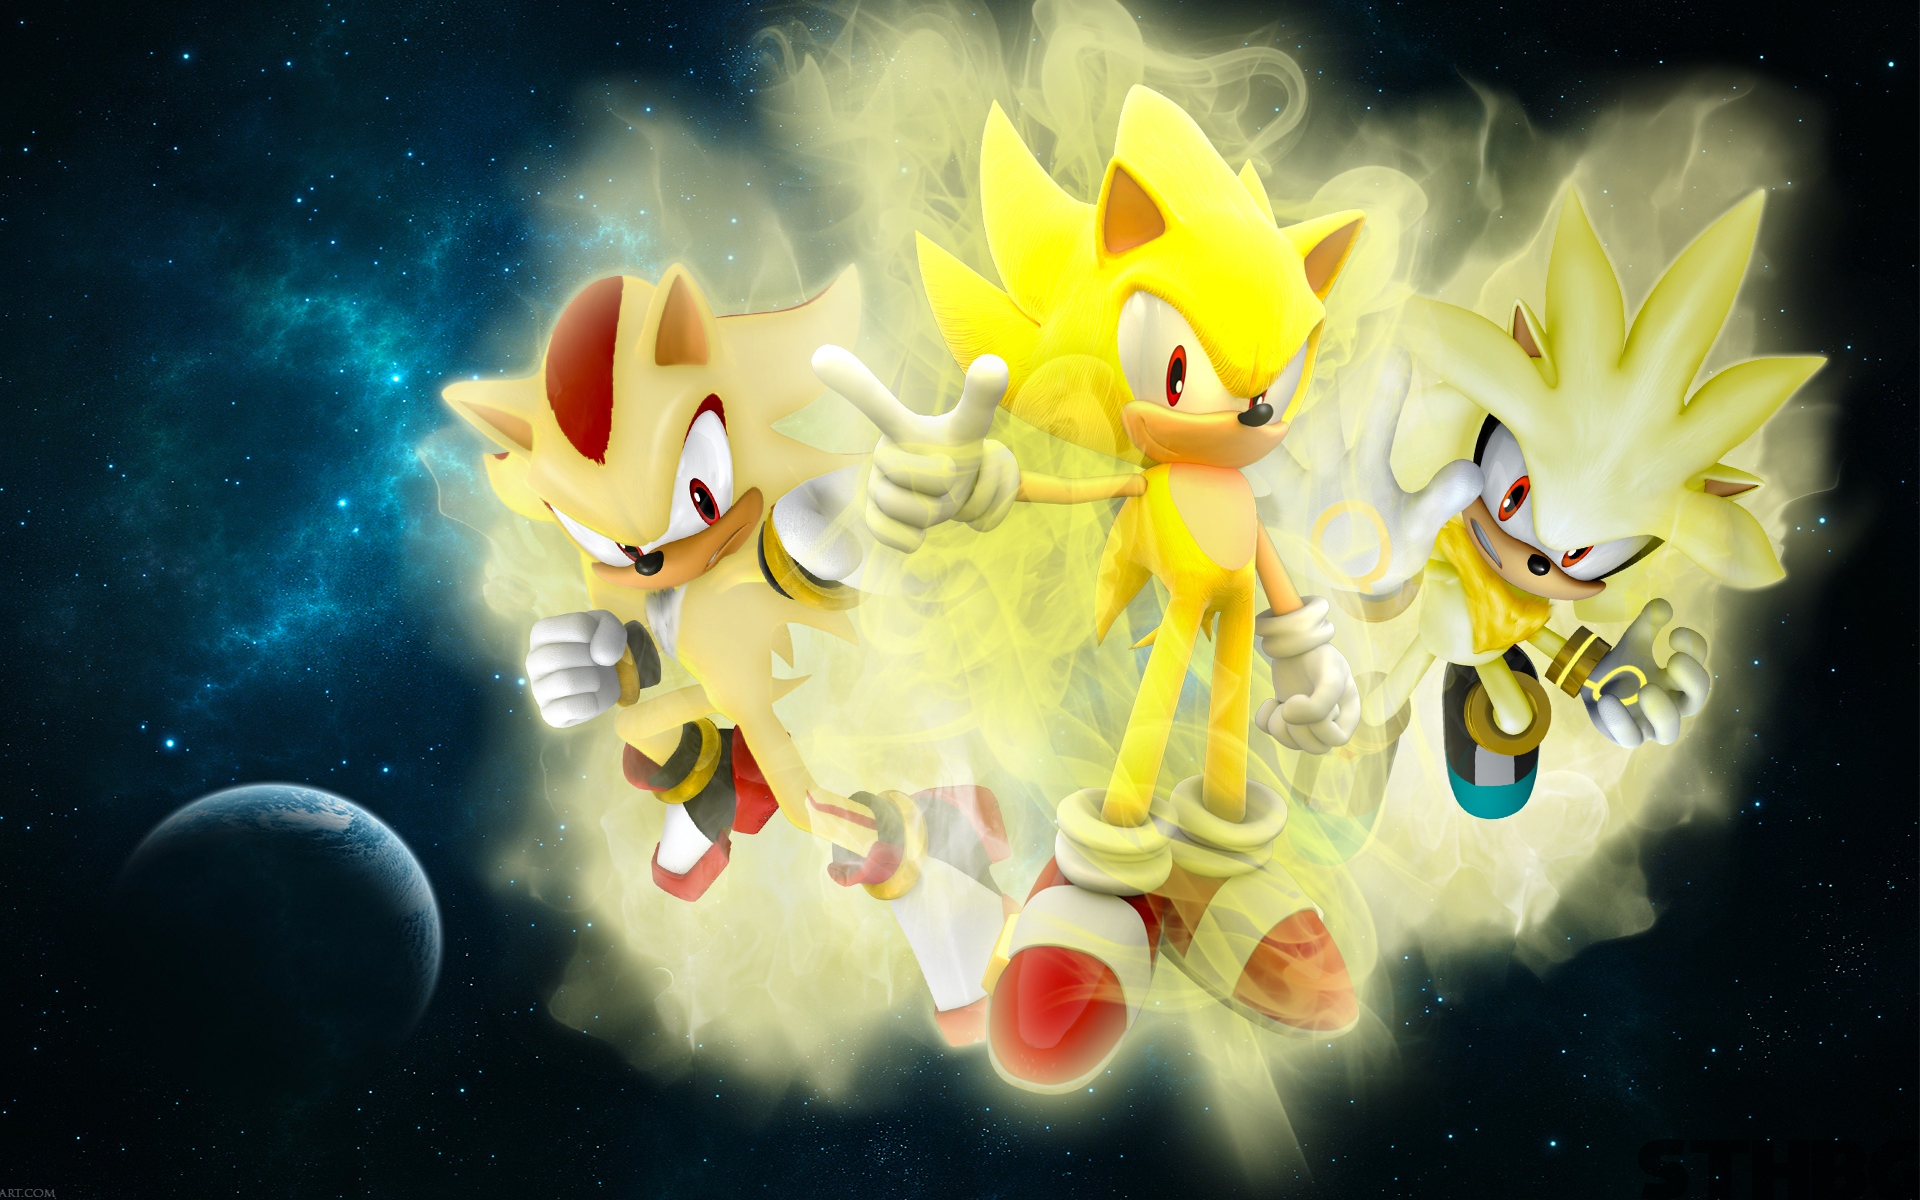 Super Sonic Vs Shadow Image Amp Pictures Becuo